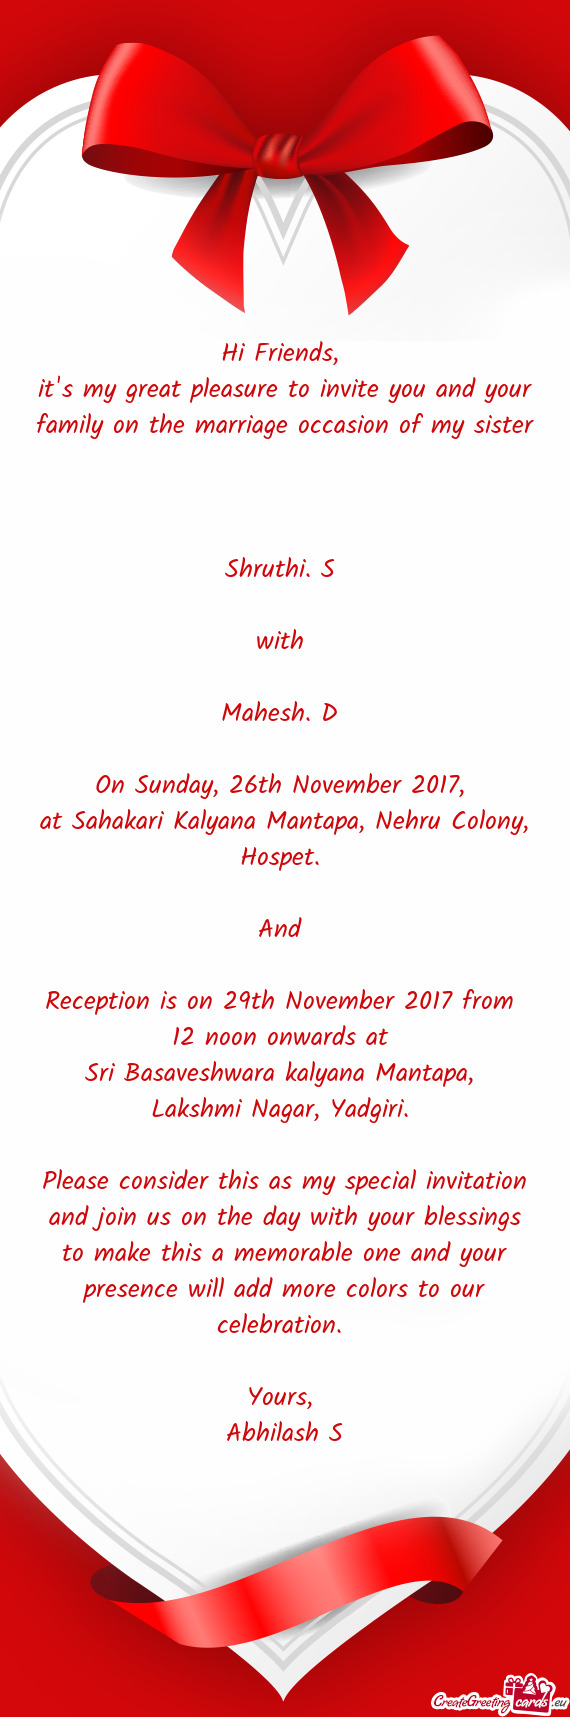 Reception is on 29th November 2017 from